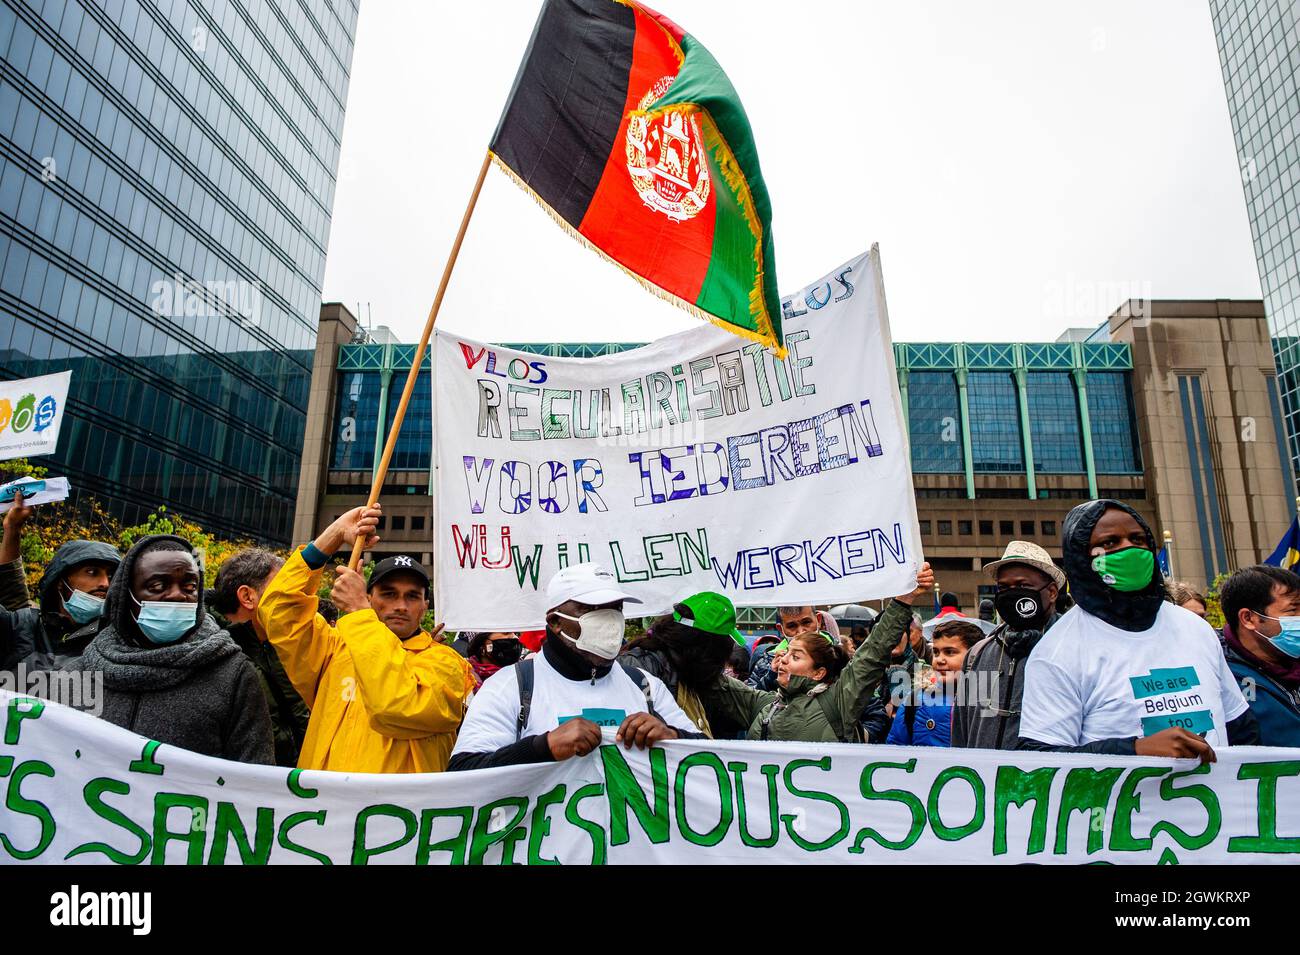 A man is seen holding a big Afghanistan flag close to a big placard asking for the regularization of the immigrants during the demonstration.Sans-papiers (without papers), an organization that represents and advocates for undocumented migrants in Belgium, planned a march in Brussels, as part of a broader campaign called “We are Belgium, too.” Thousands of people demonstrated to demand that a national regulatory commission should be established in regards to undocumented migration, and calls for the integration of undocumented migrants into the Belgian rule of law. Stock Photo